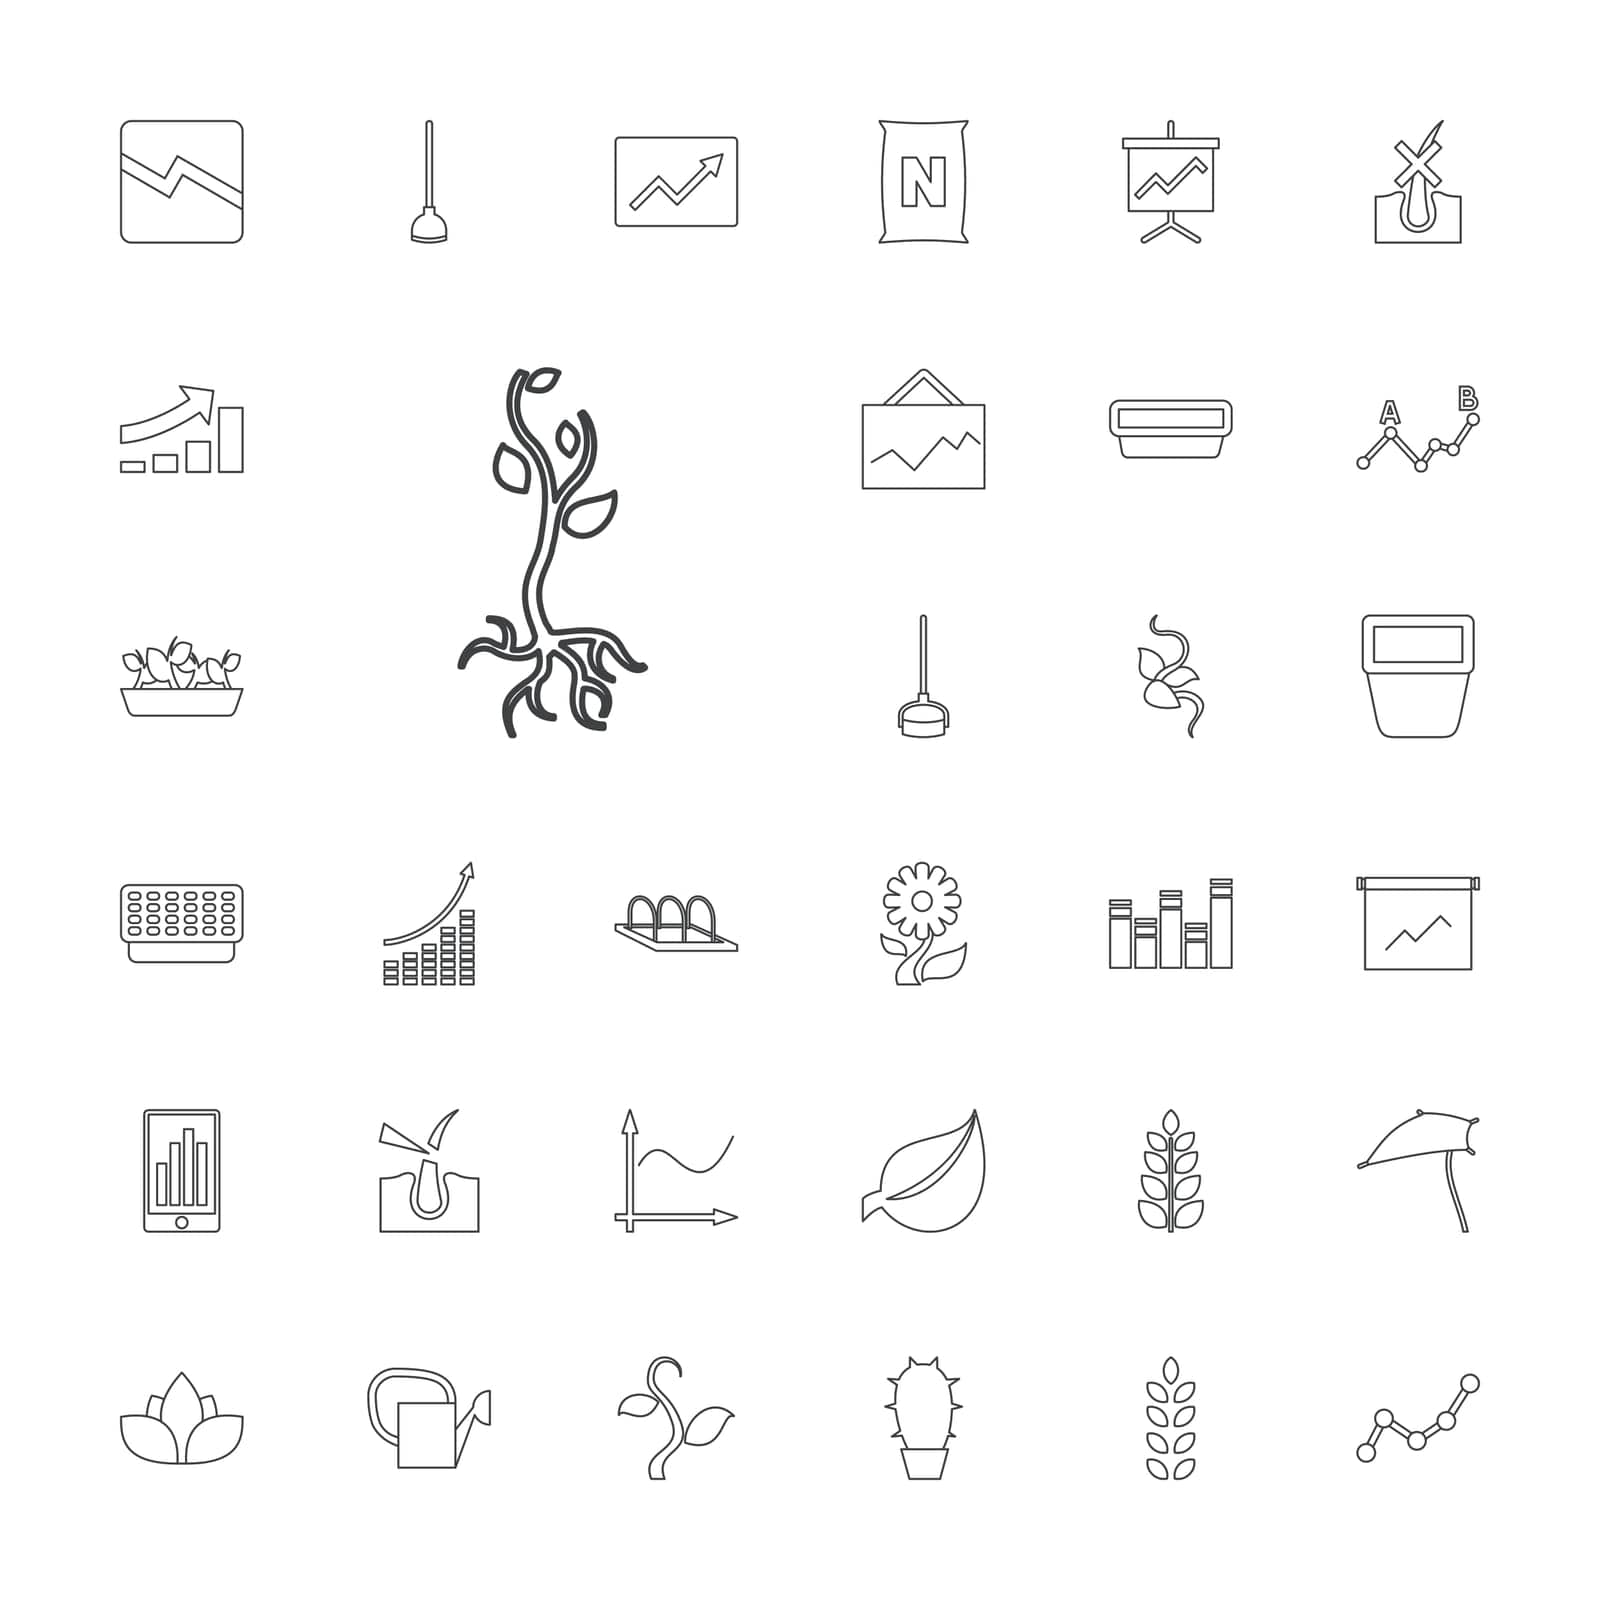 no,line,icon,skin,for,bag,dandelion,can,hair,pot,plants,cactus,vector,shave,on,greenohuse,set,sprout,in,display,leaf,graph,flower,with,watering,plant,growth,ground,illustration,chart,board,hoe